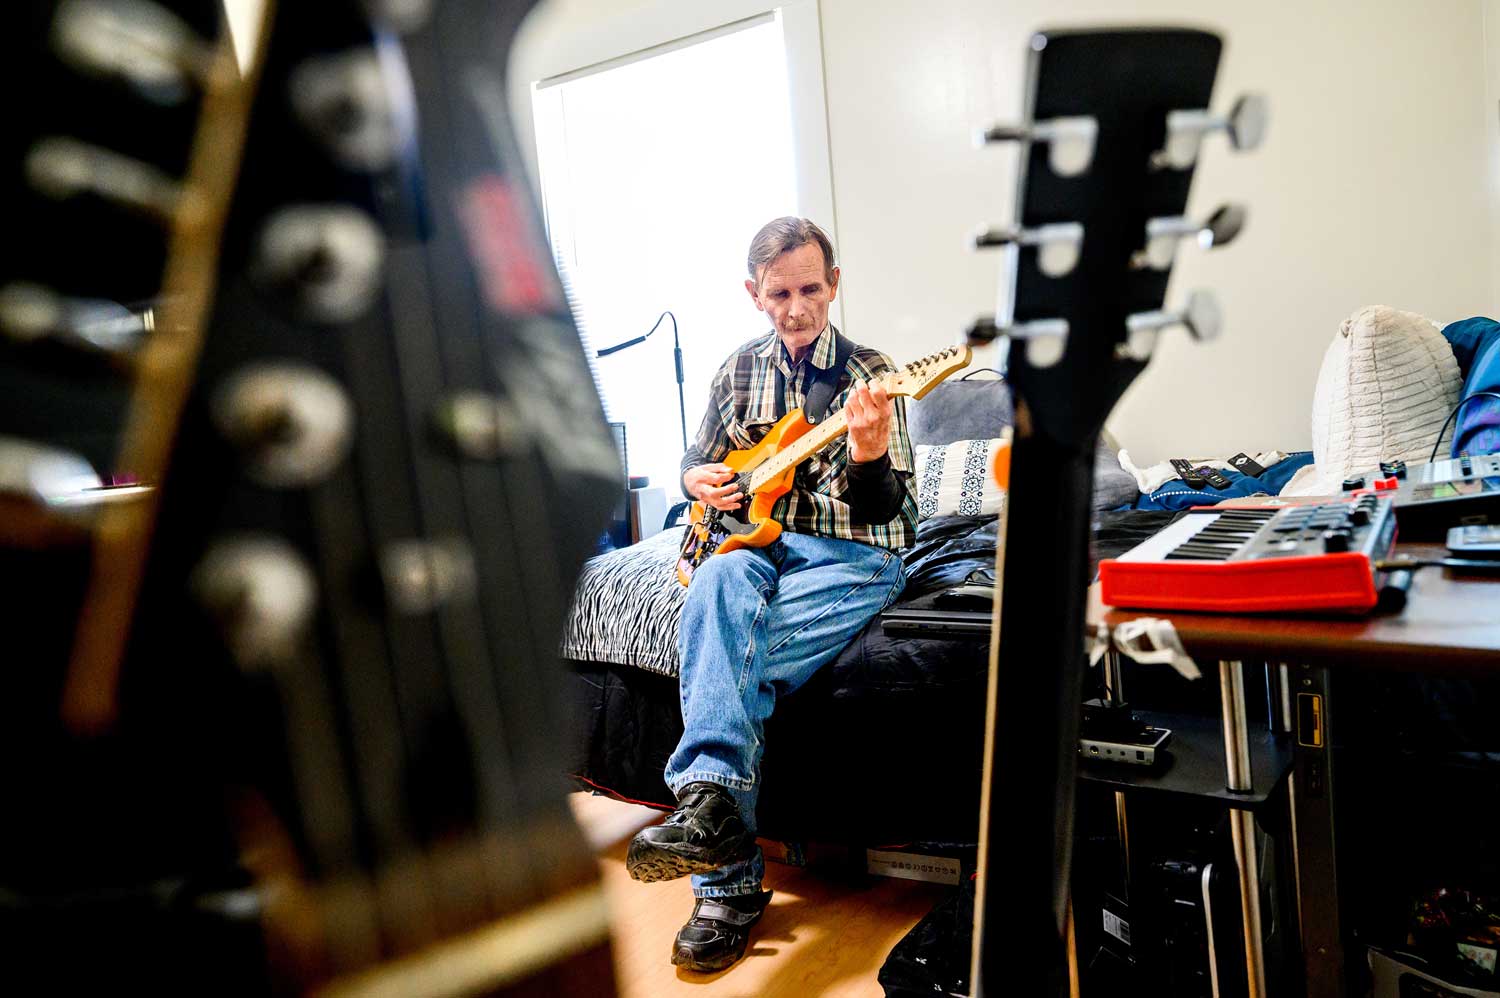 Bill sits on his bed and plays an orange electric guitar. In the foreground are the necks of two other guitars.